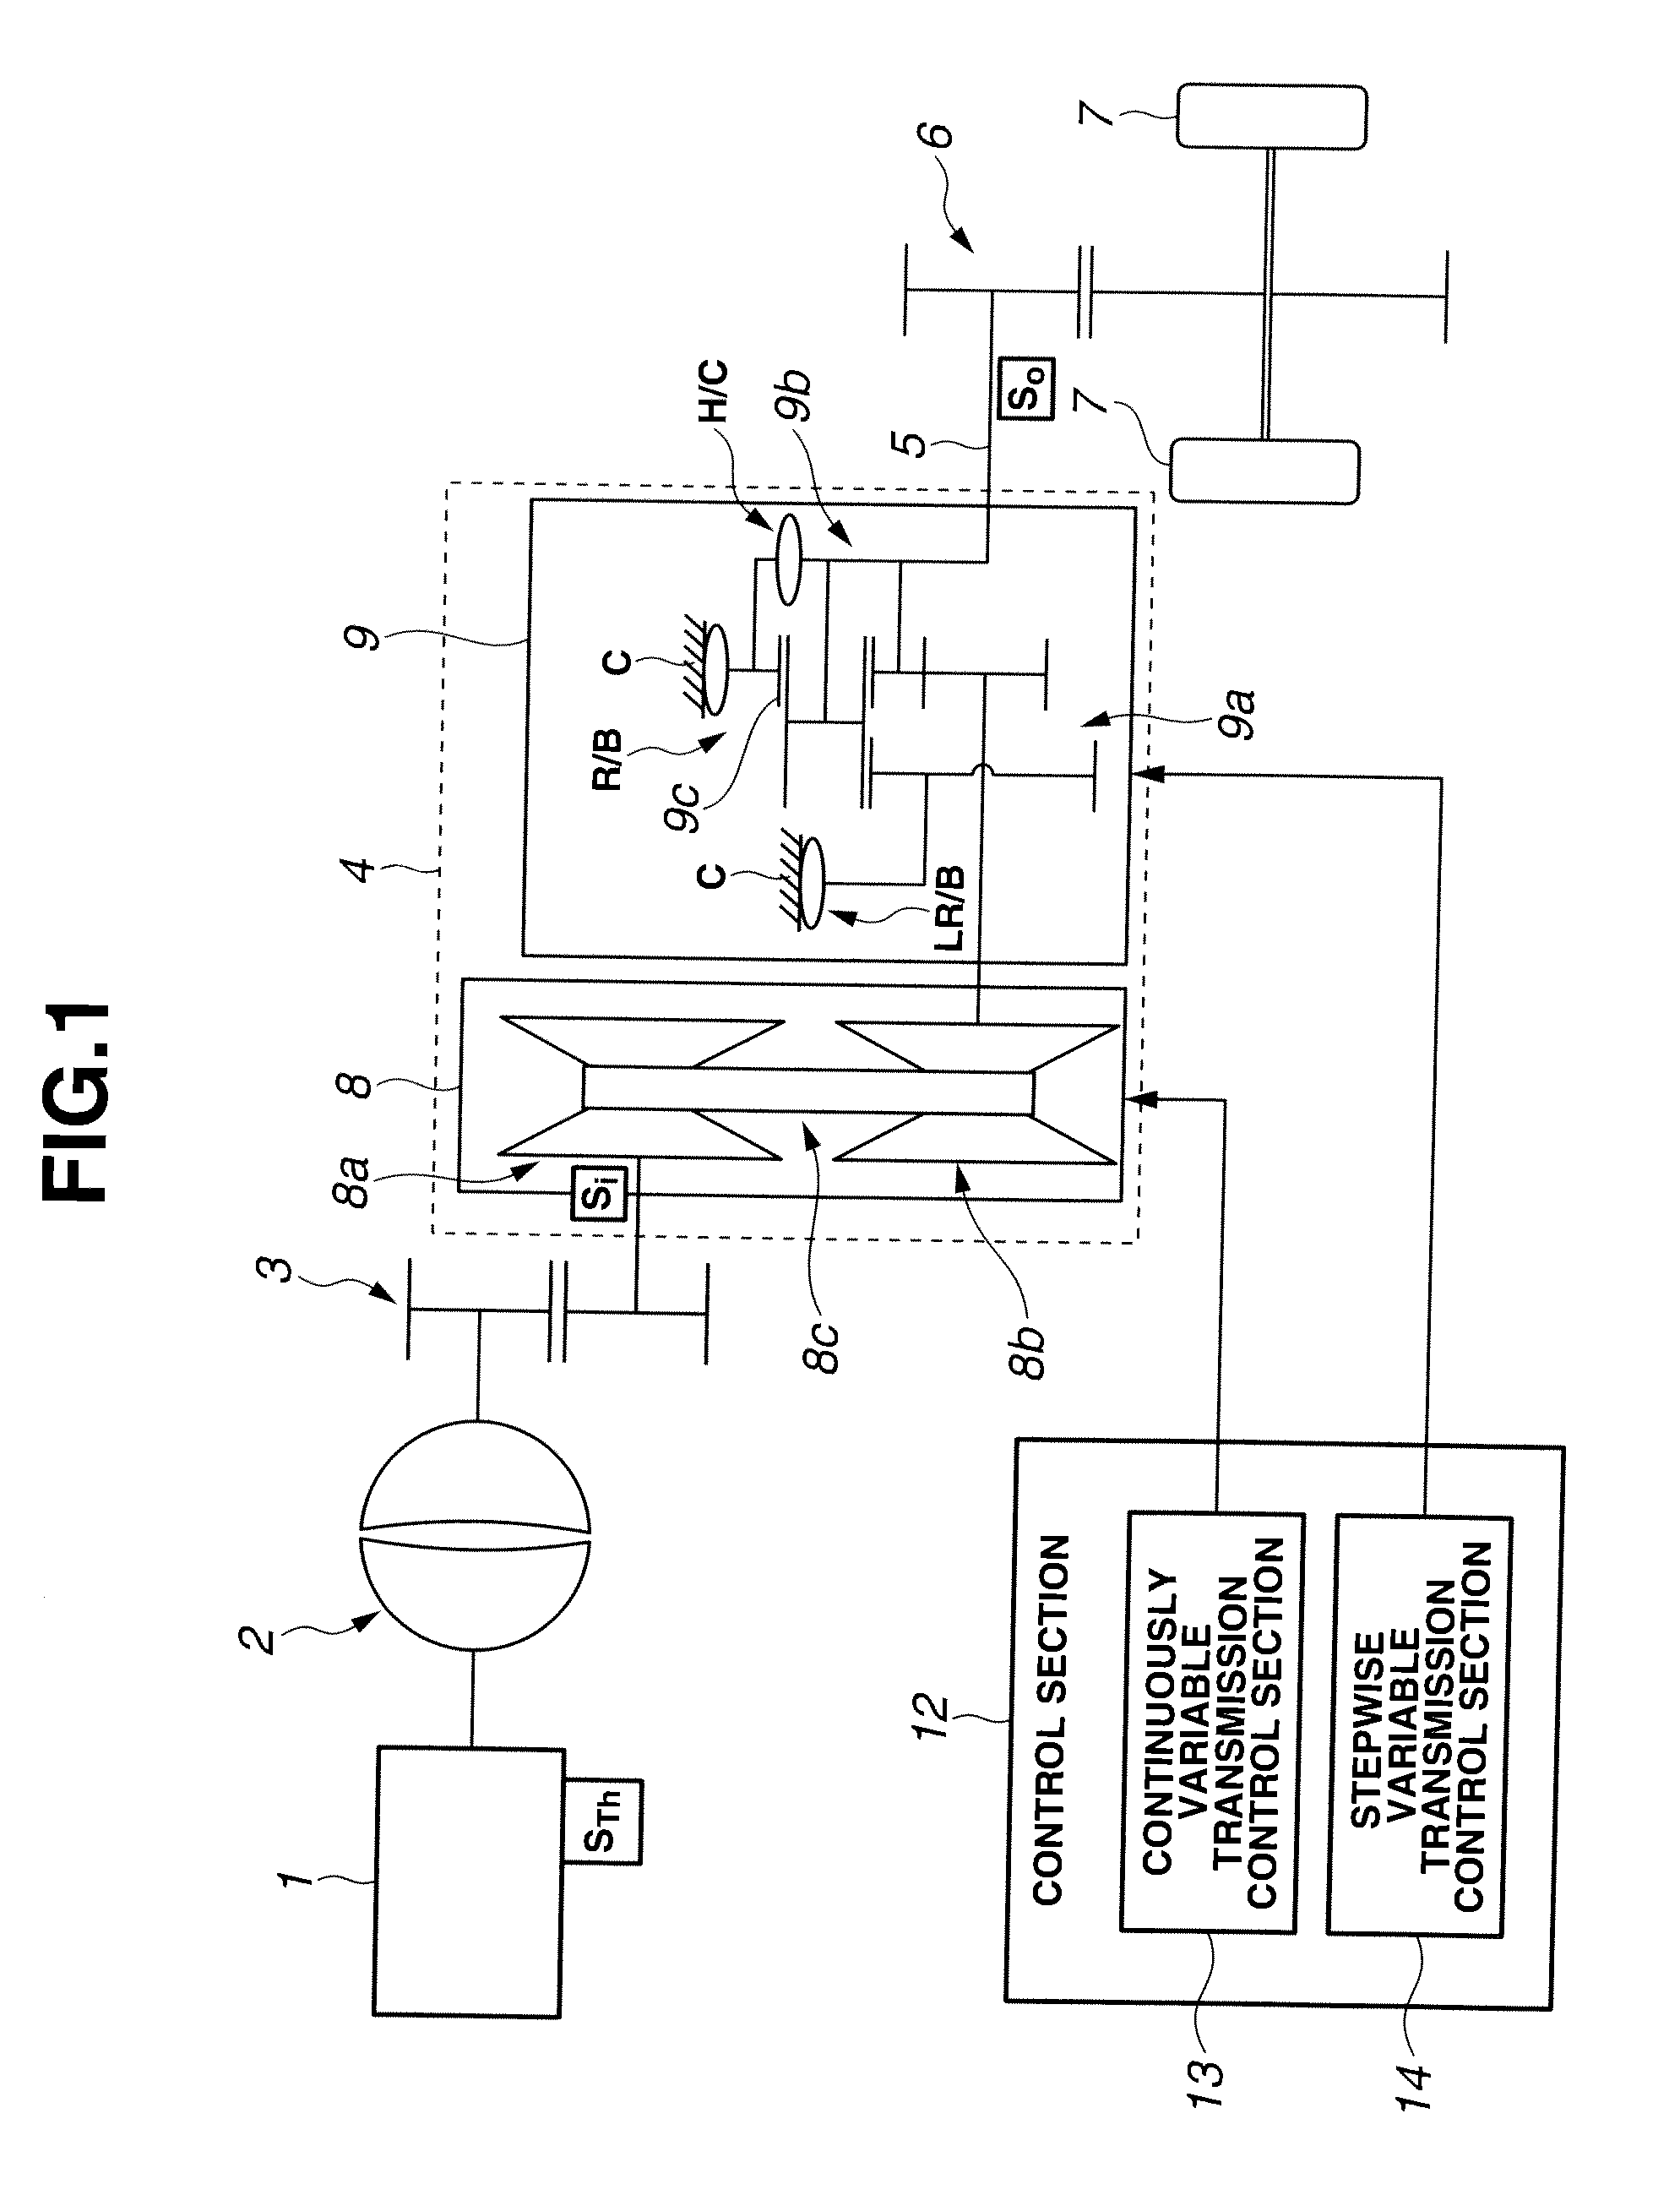 Control apparatus and method for automatic transmission system